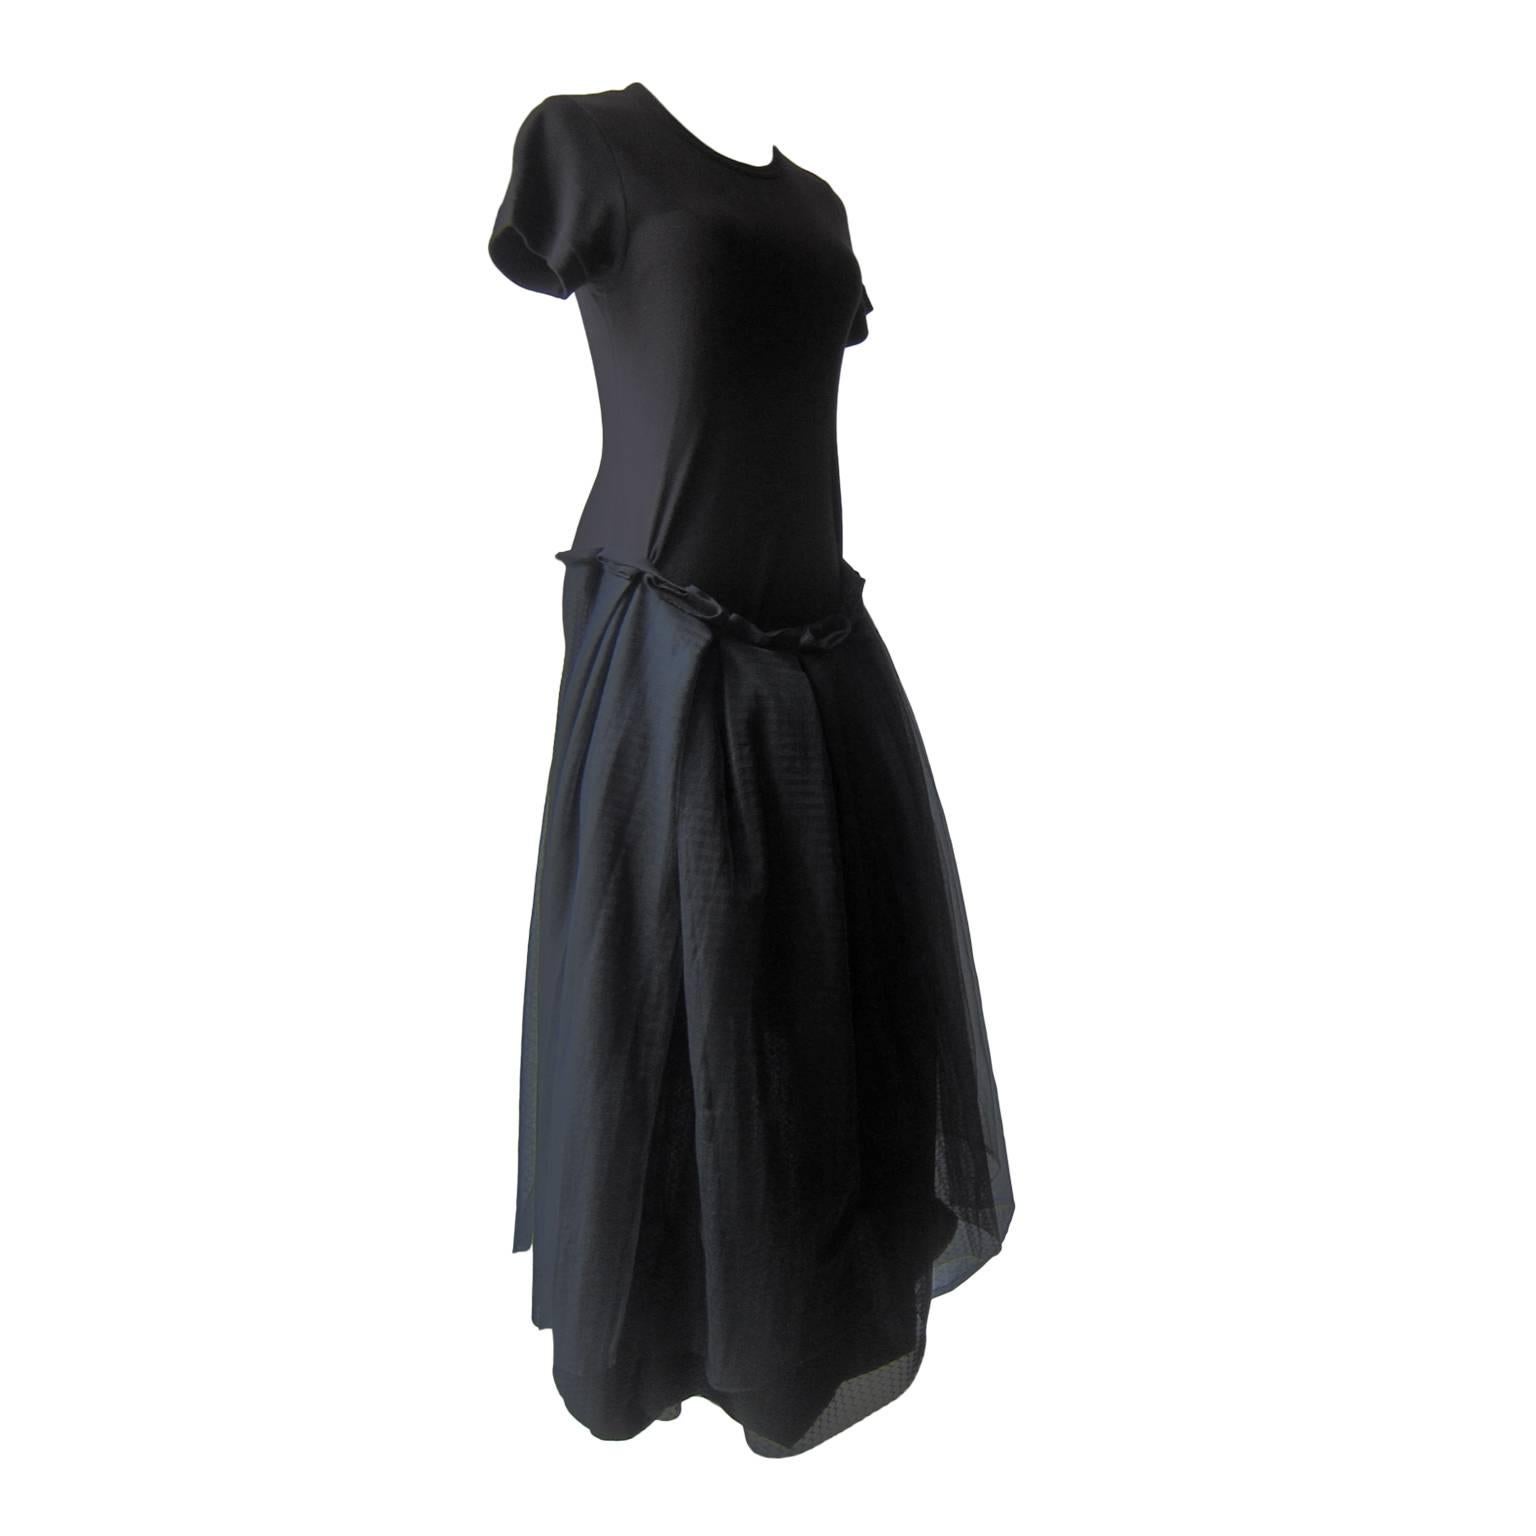 Rare Comme des Garcons black dress AD 1998.
Knee length jersey dress with layers of tulle gathered on body front.
Amazing.

Shoulder : 34.5 cm
Sleeve length : 14.5 cm
Underarm : 70 cm
Waist : 68 cm
Hip : 73 cm
Length Back : 100 cm
Tulle Length : 74